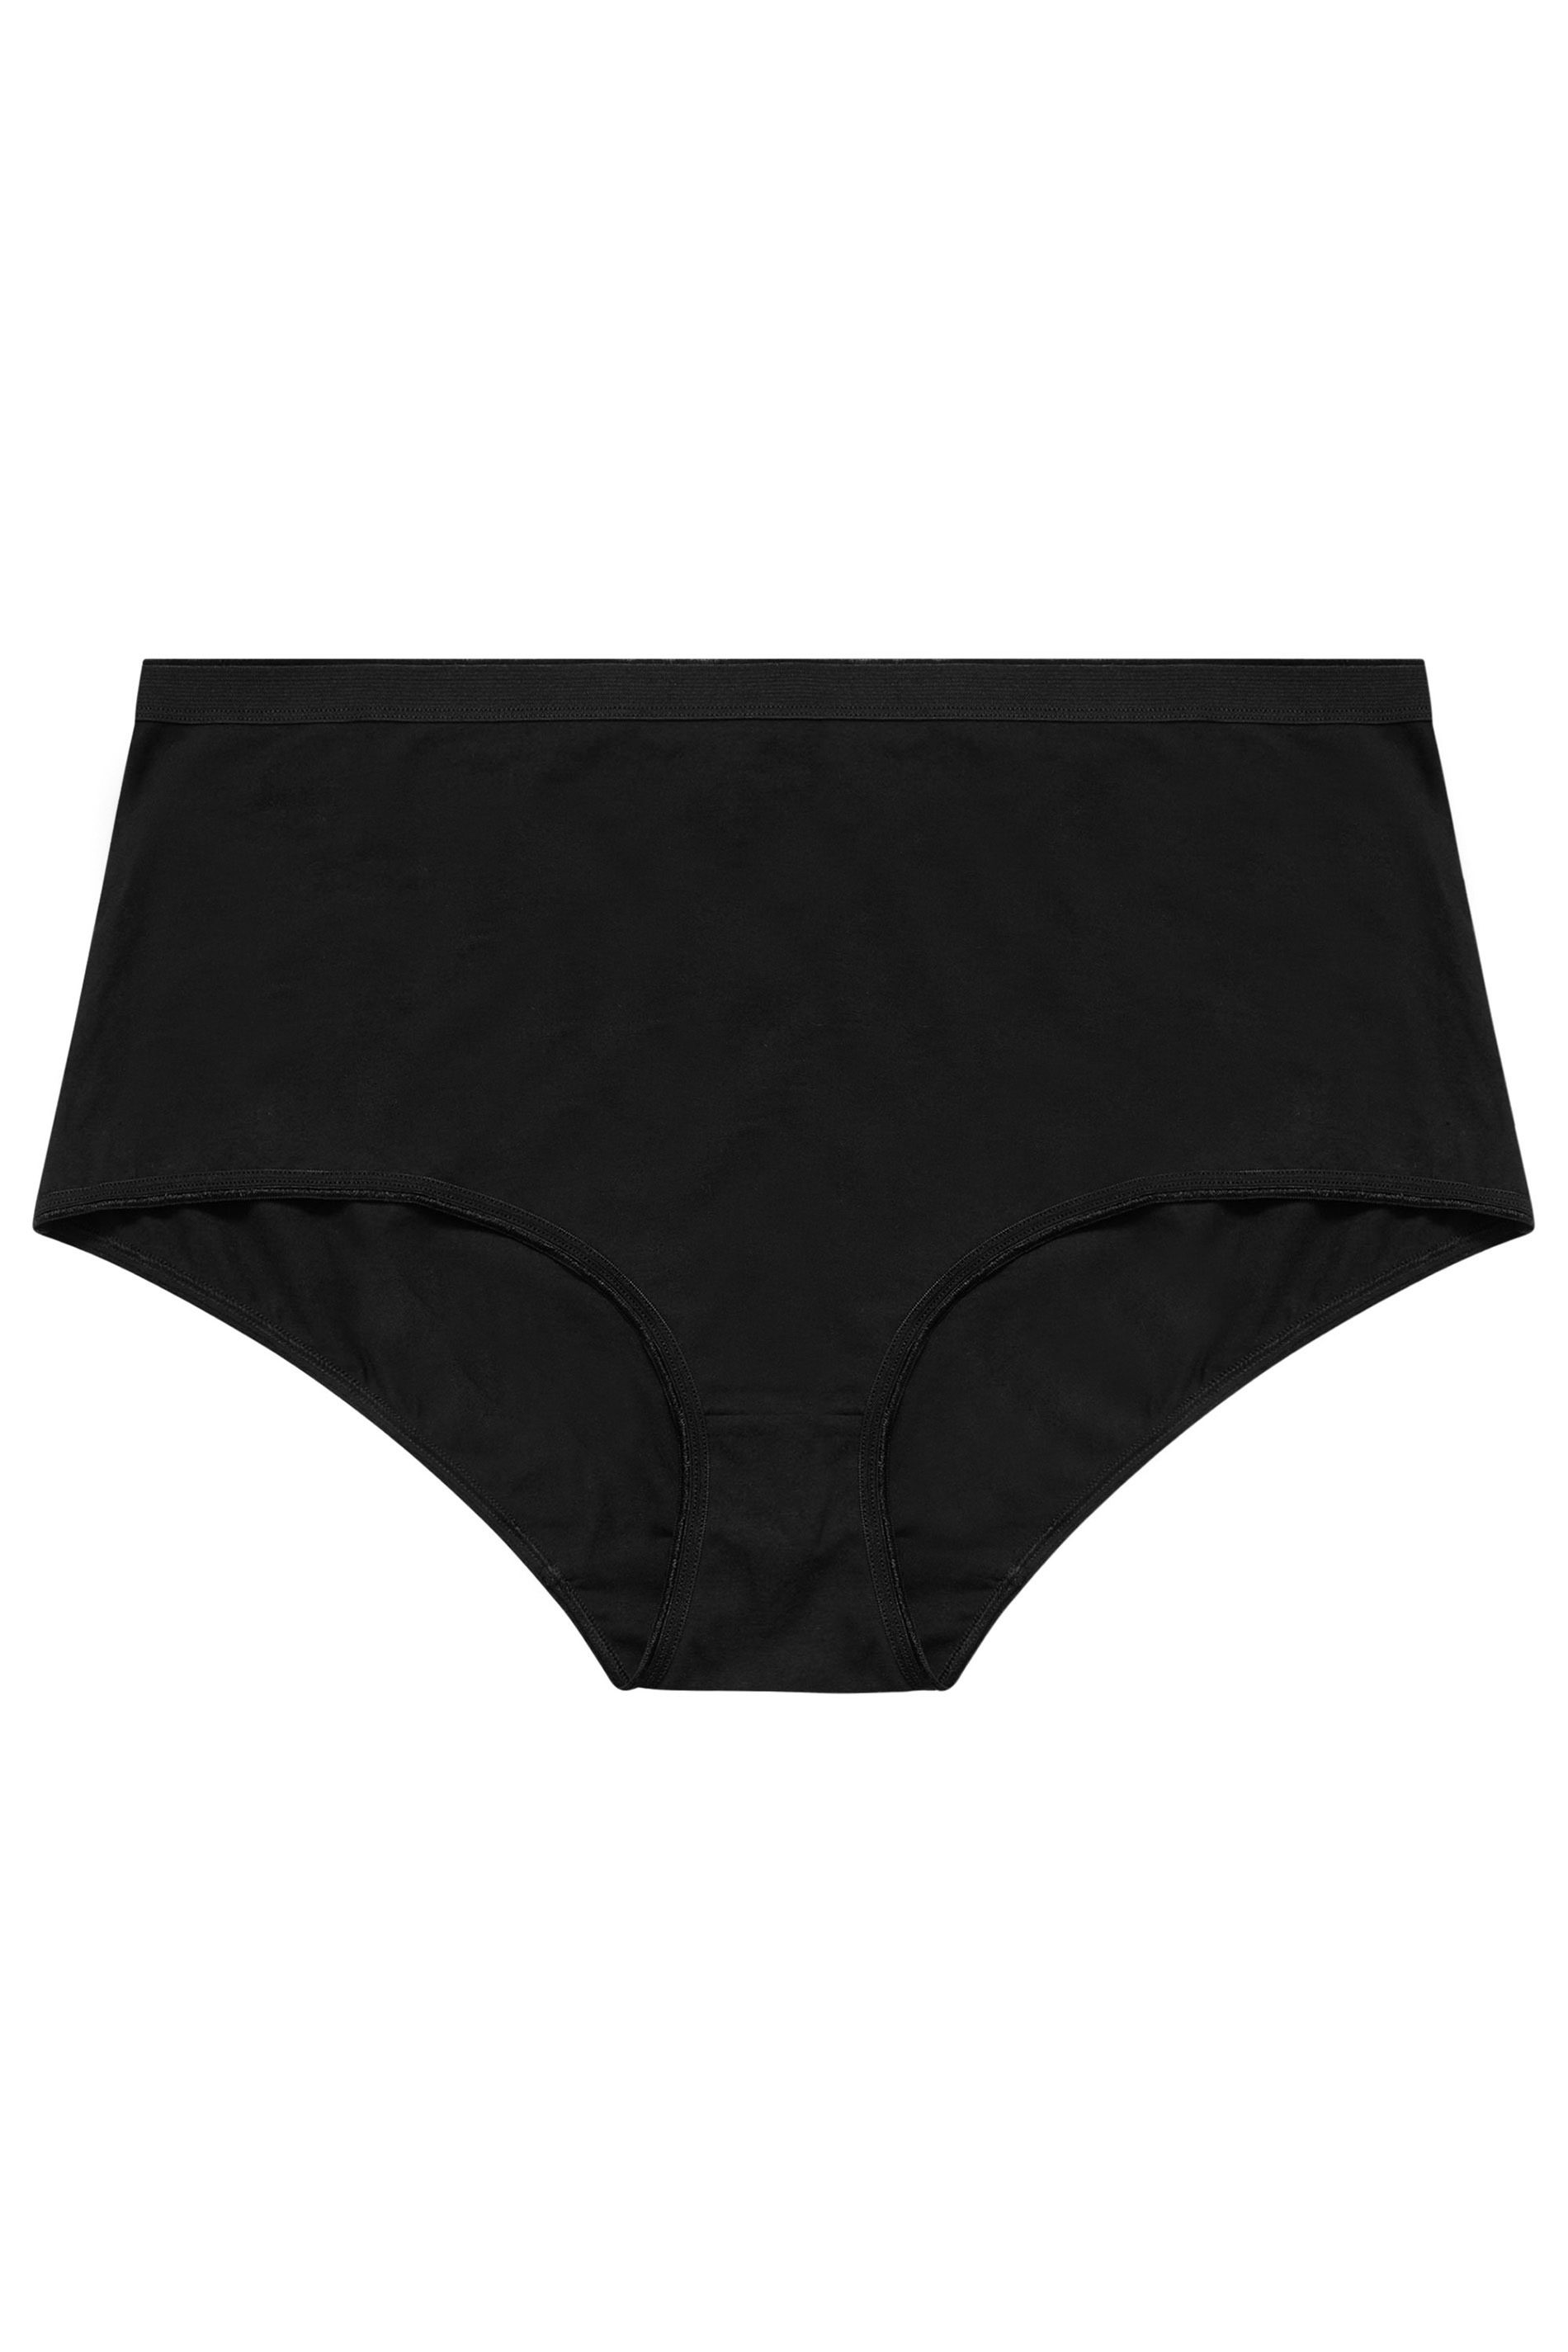 YOURS 4 PACK Plus Size Black Cotton Stretch Full Briefs | Yours Clothing